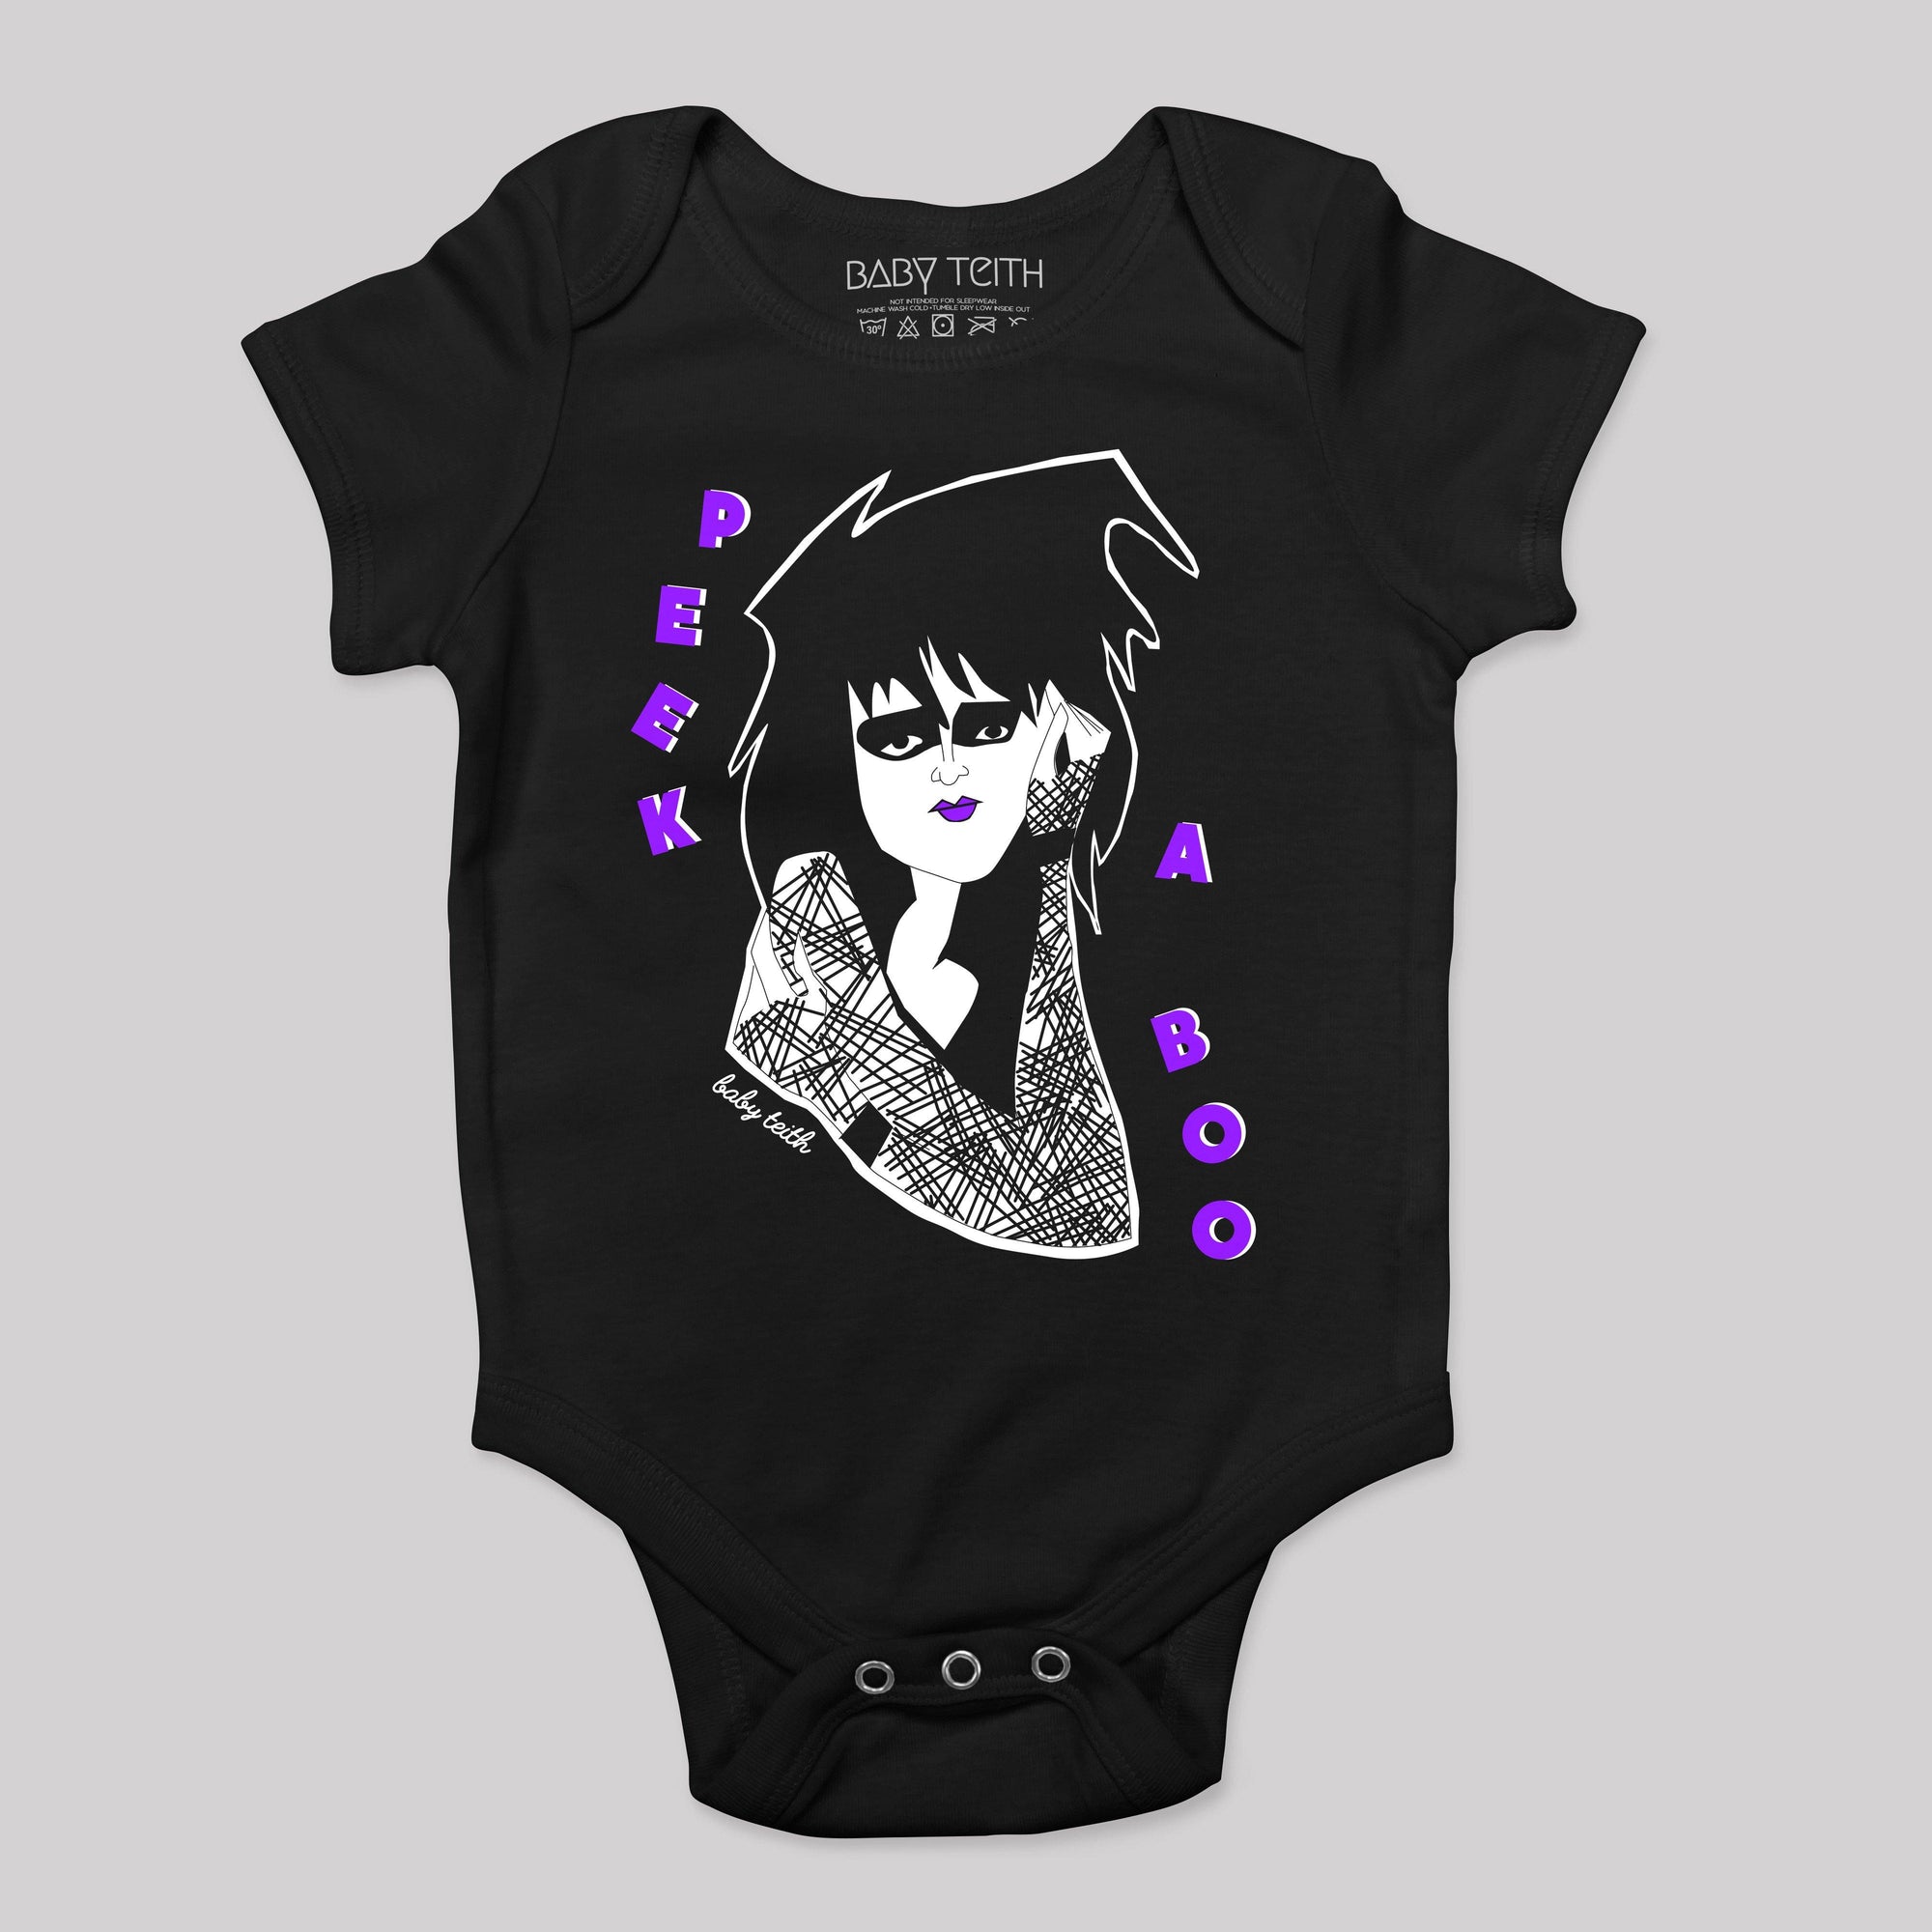 &quot;Peek-a-boo&quot; Bodysuit for Babies - Baby Teith